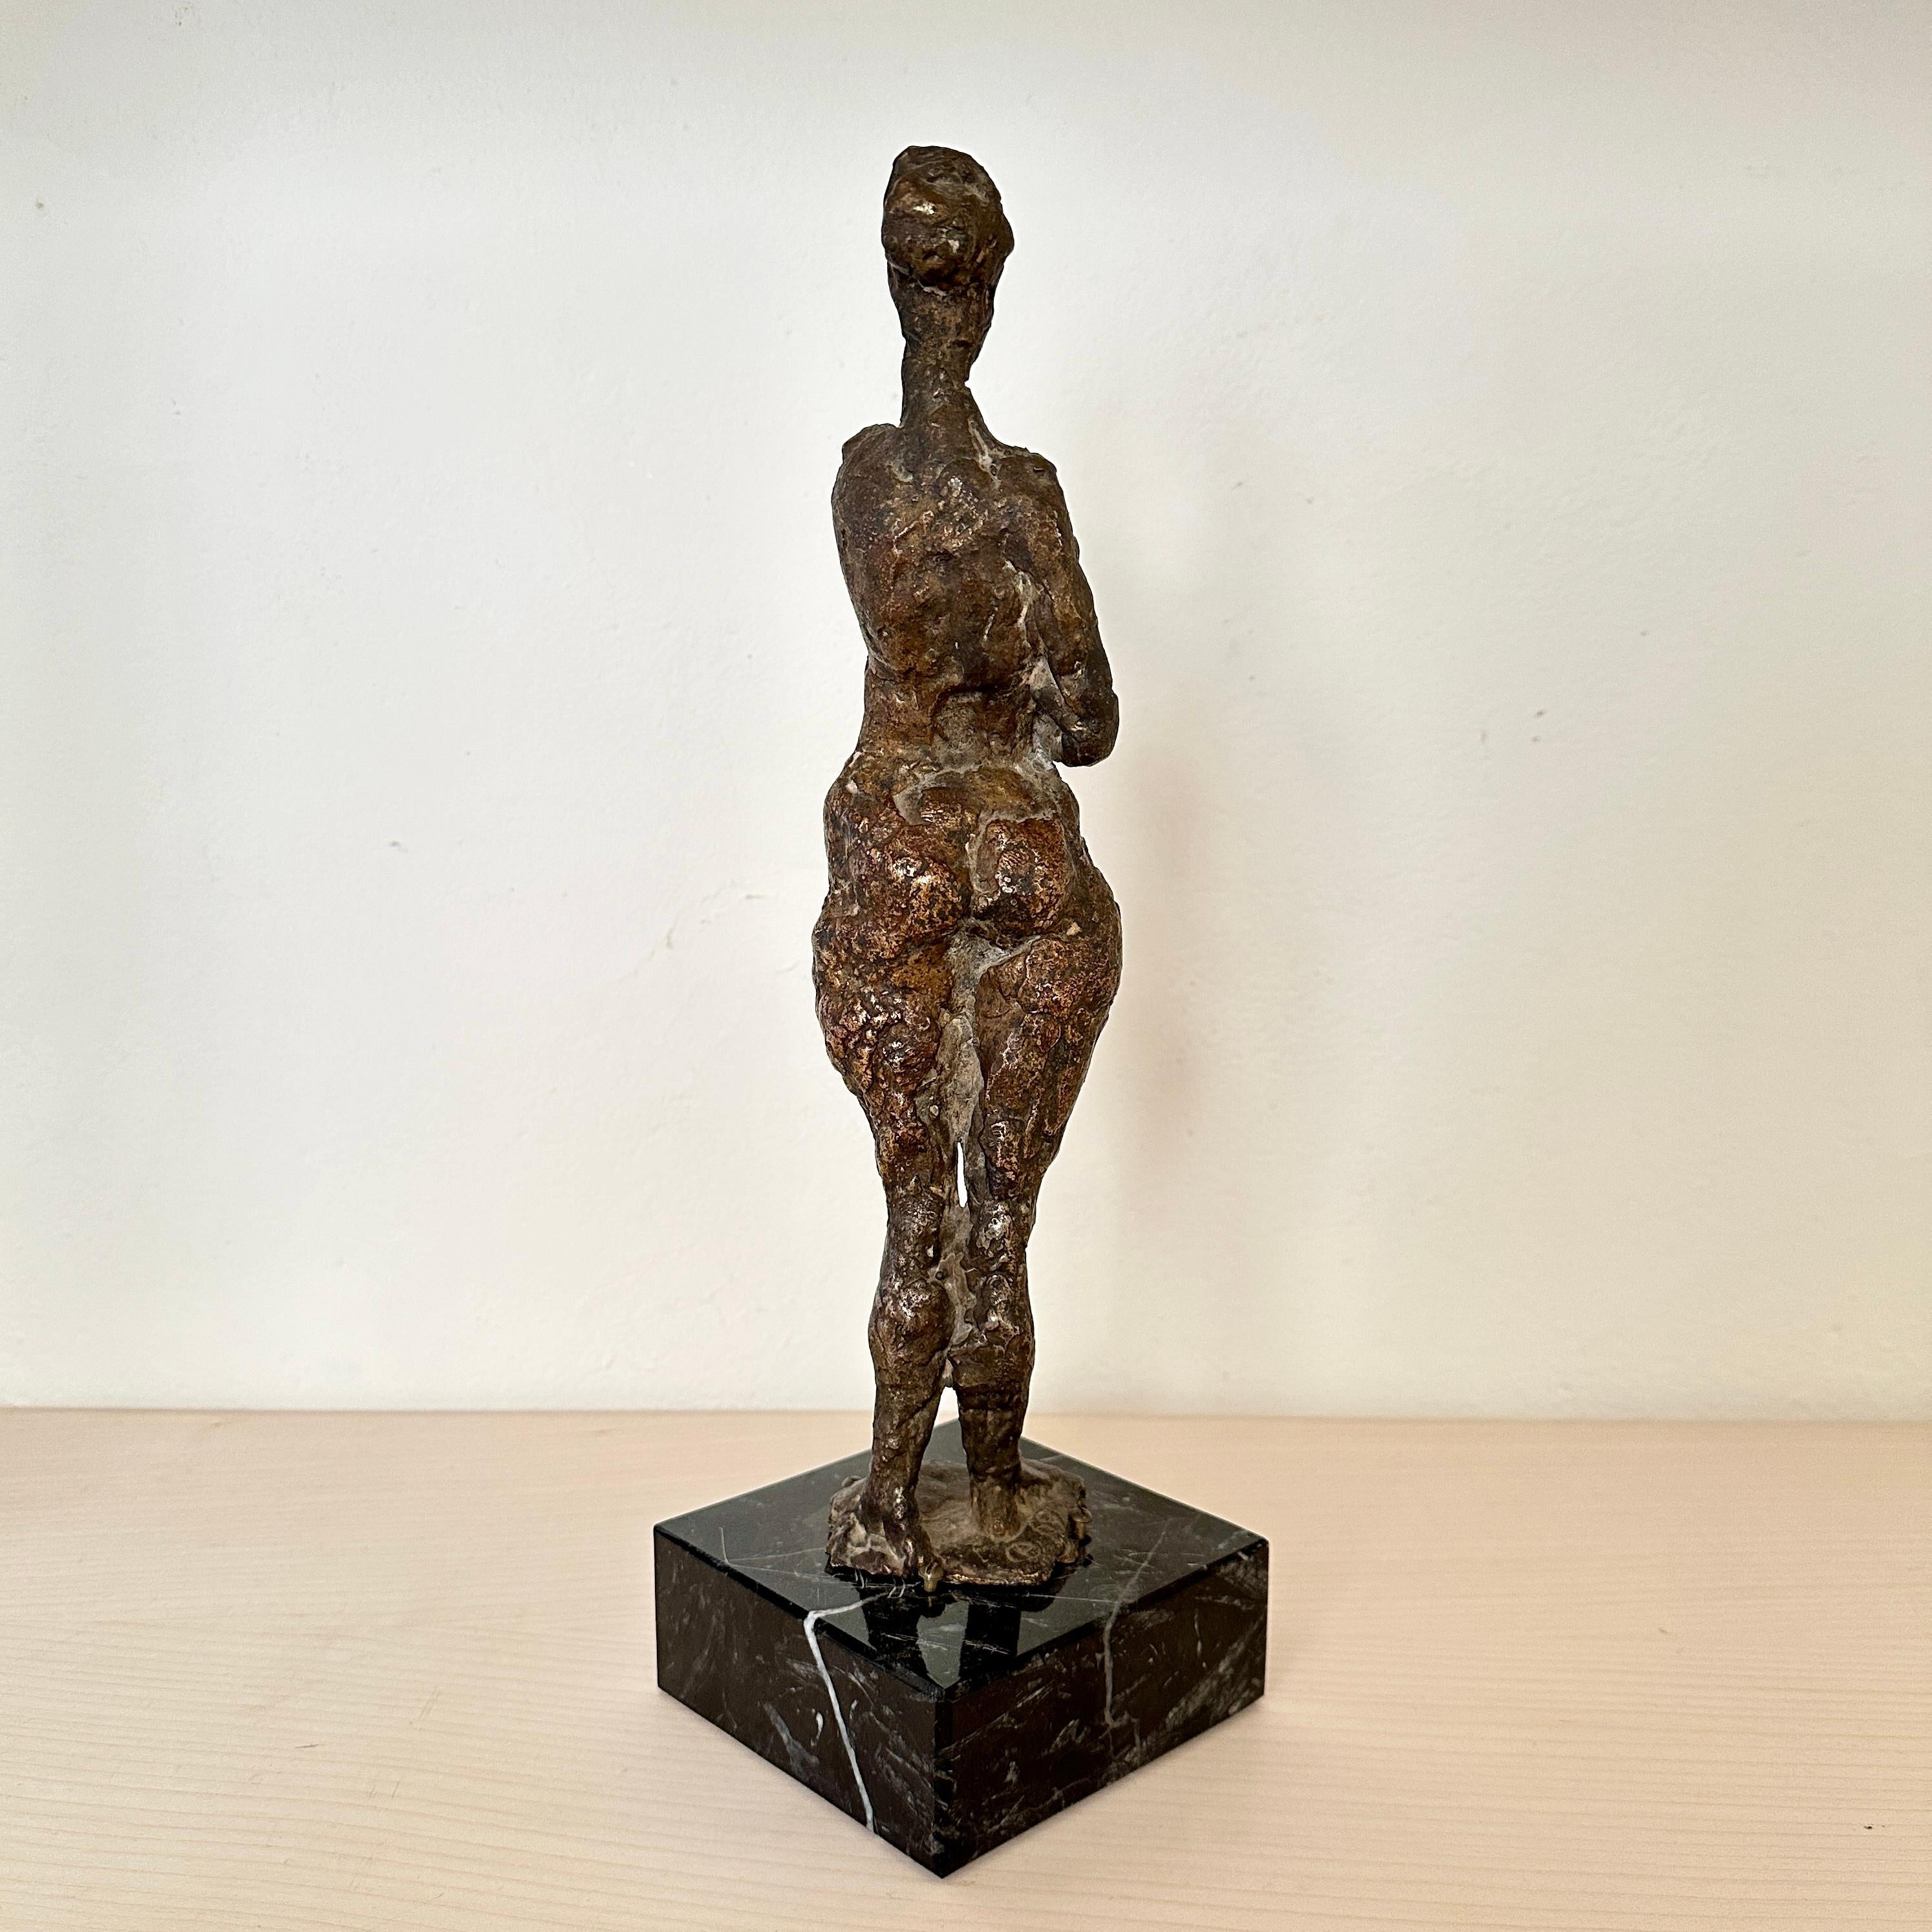 Small Cast Bronze Woman Sculpture by Oskar Bottoli on a Black Marble Stand, 1969 For Sale 6